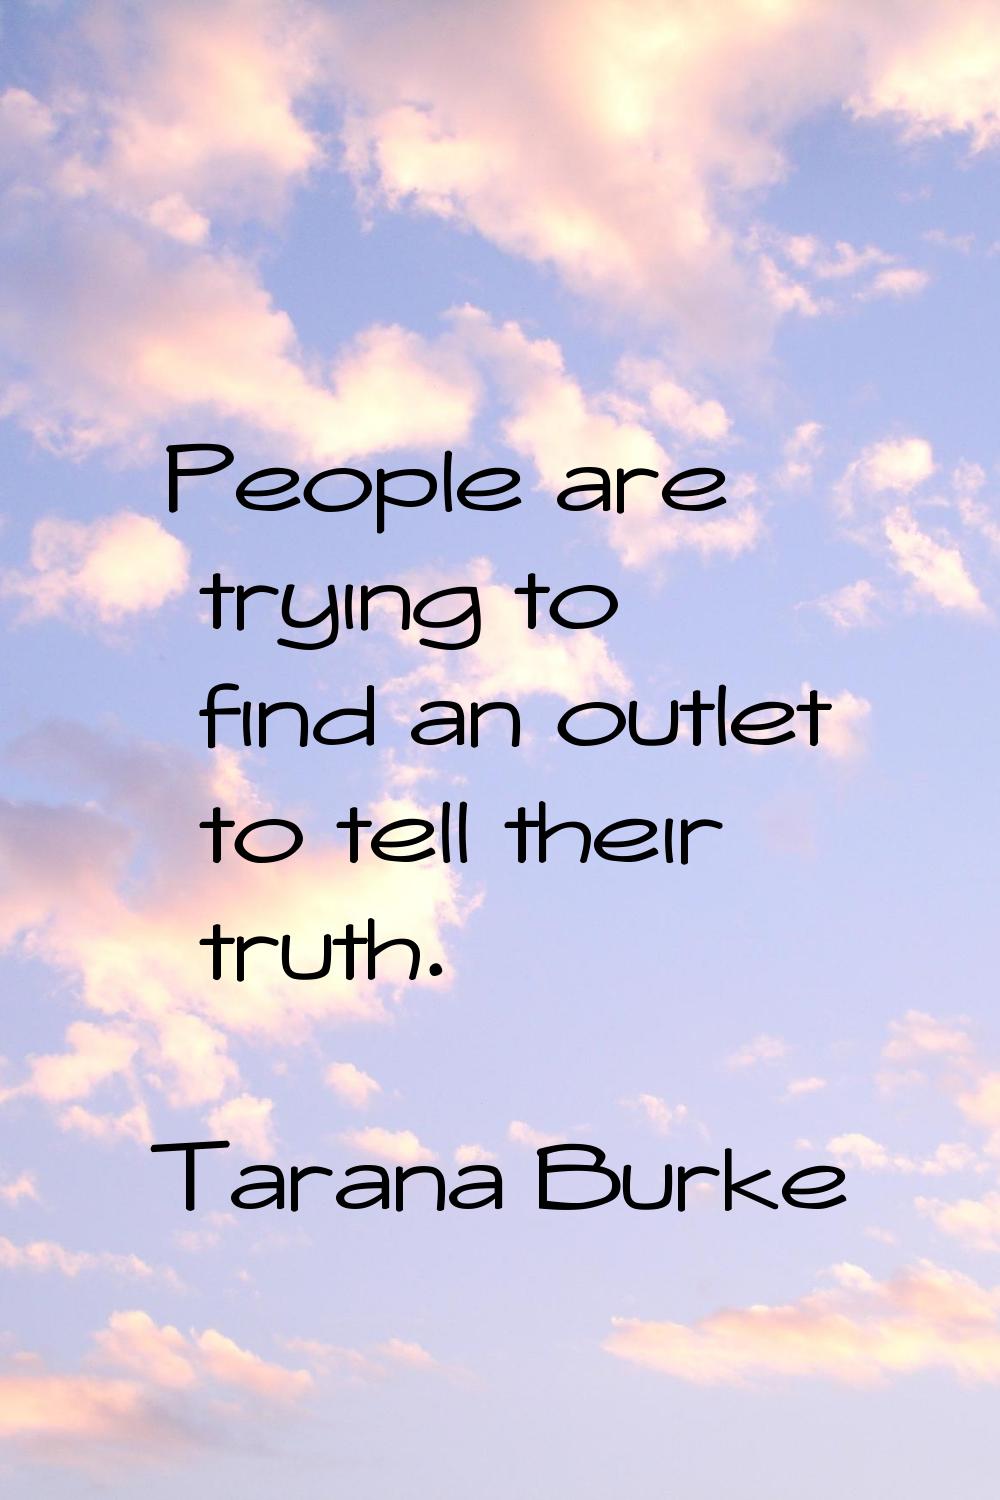 People are trying to find an outlet to tell their truth.